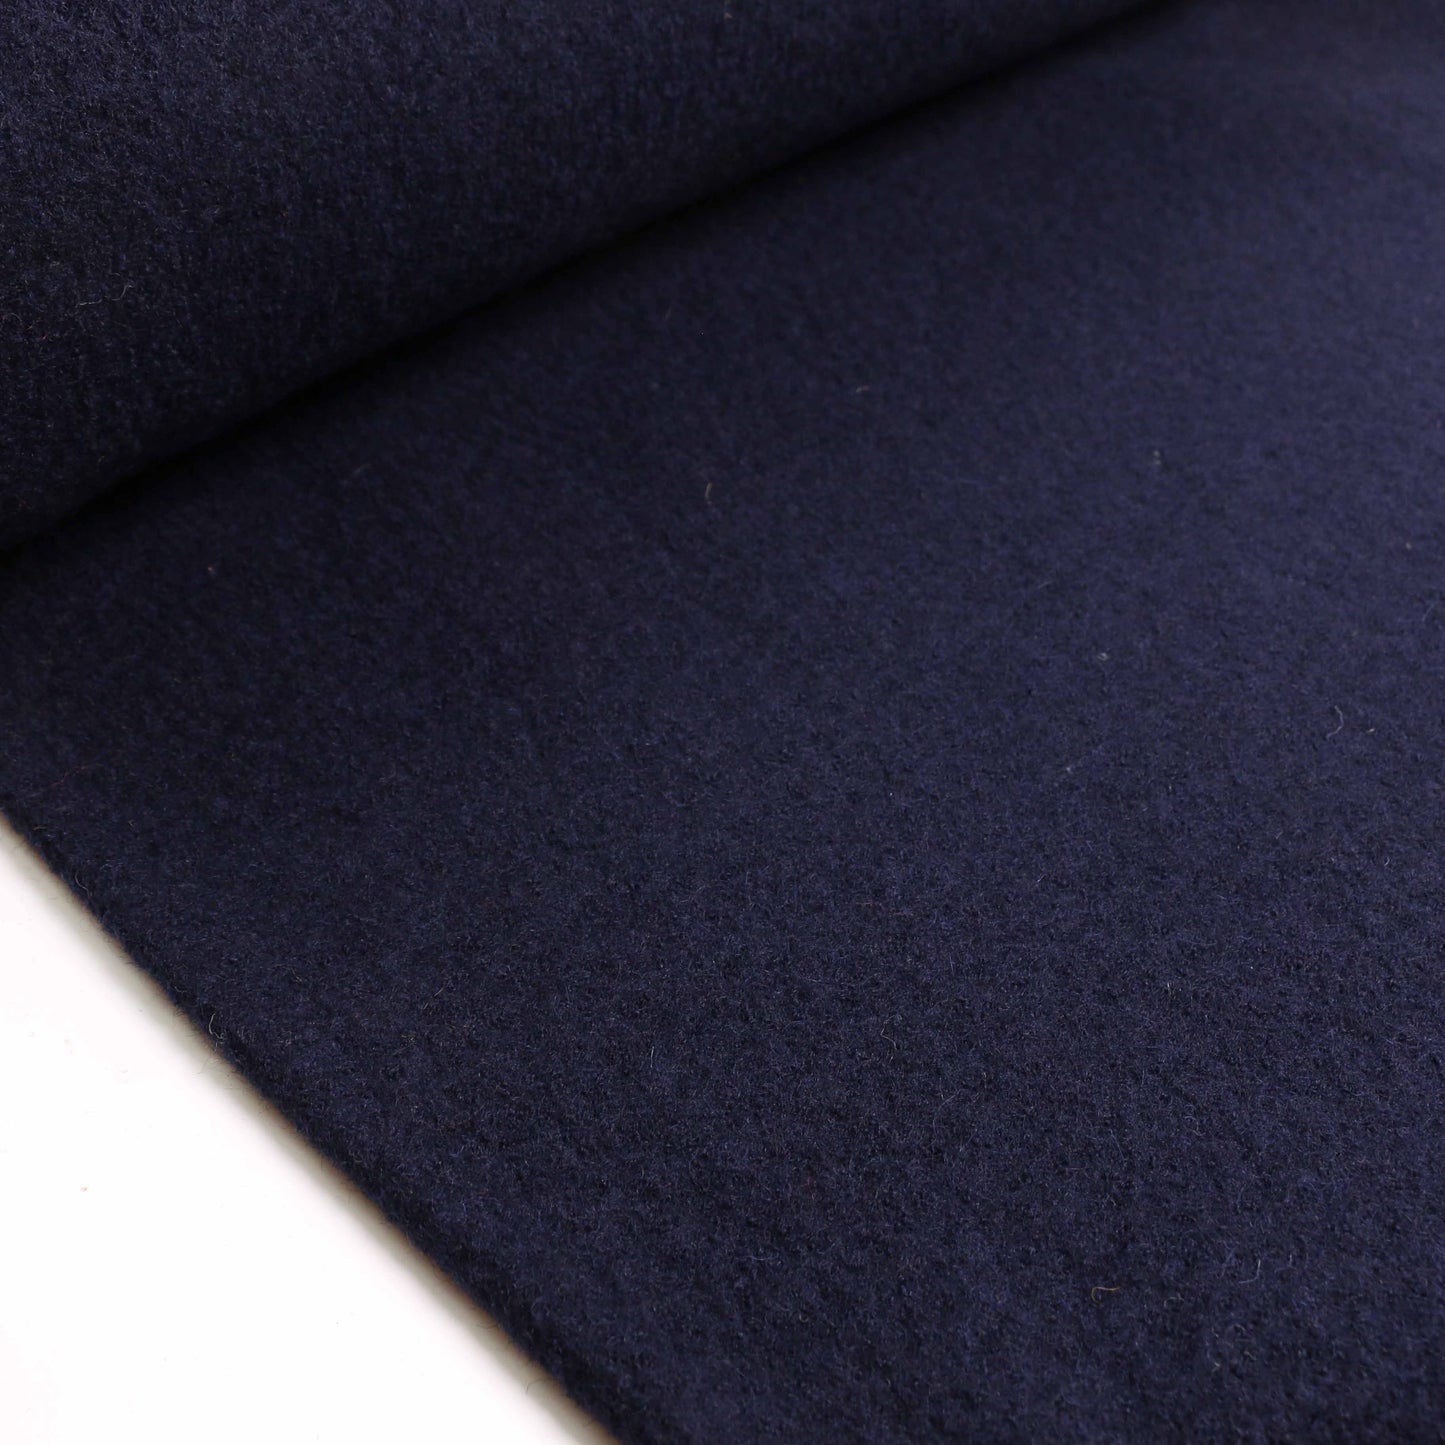 Boiled Wool Fabric - Teal, mustard, charcoal, black, navy